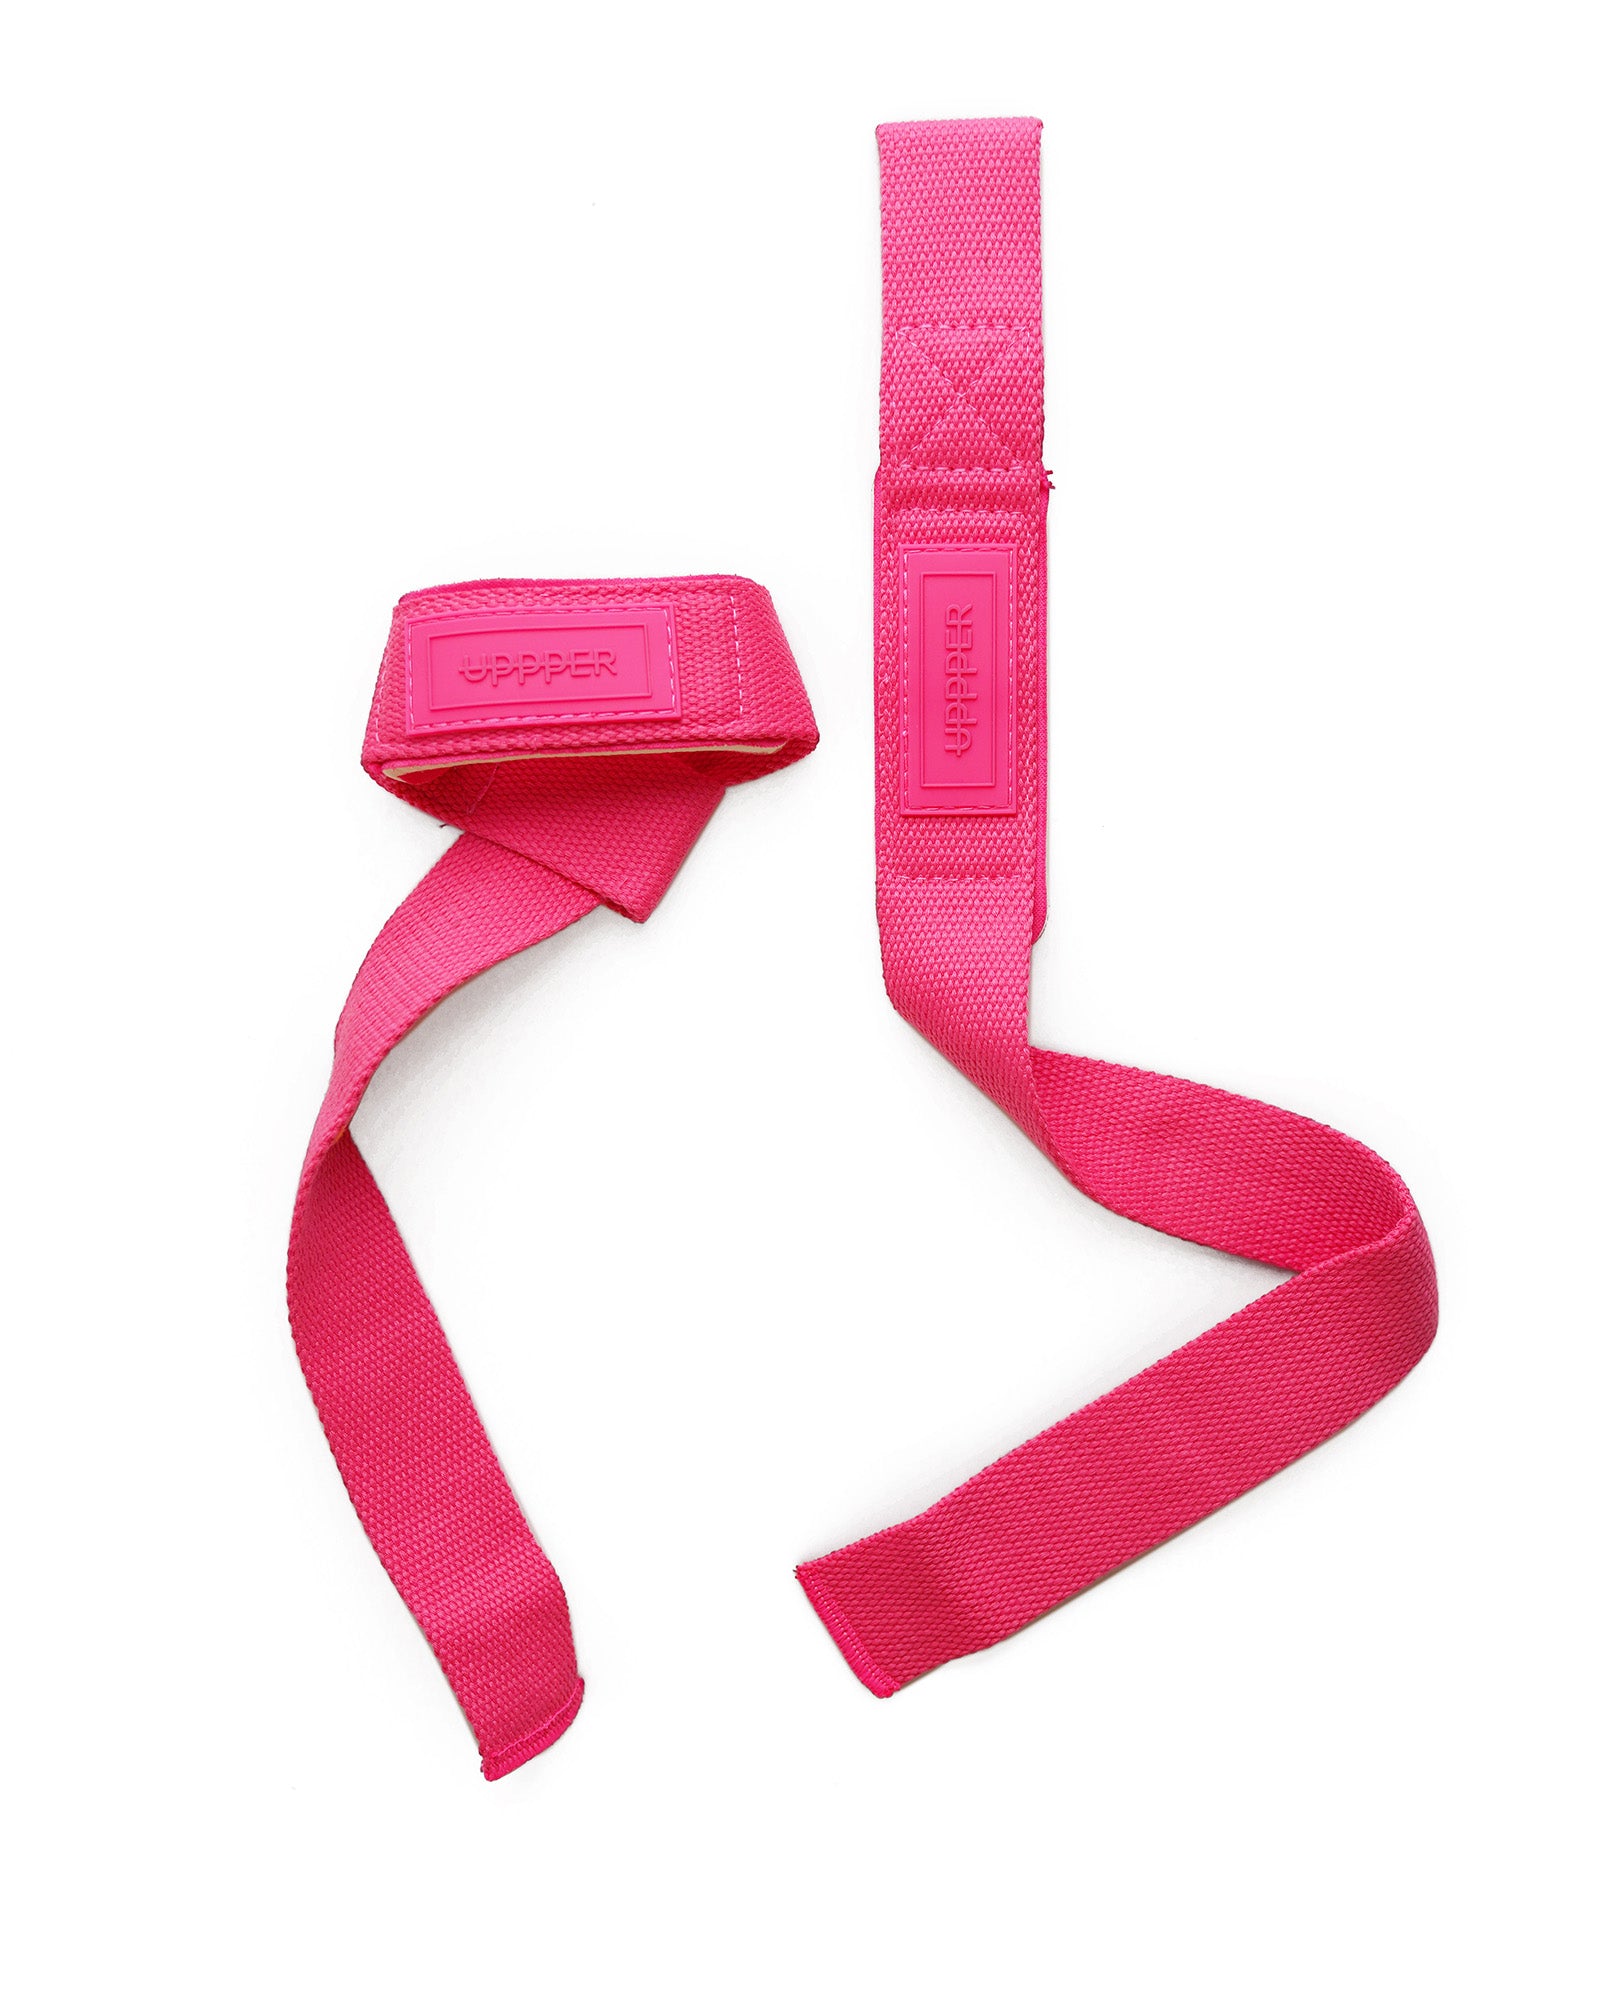 Death Grips Padded Lifting Straps - JerkFit